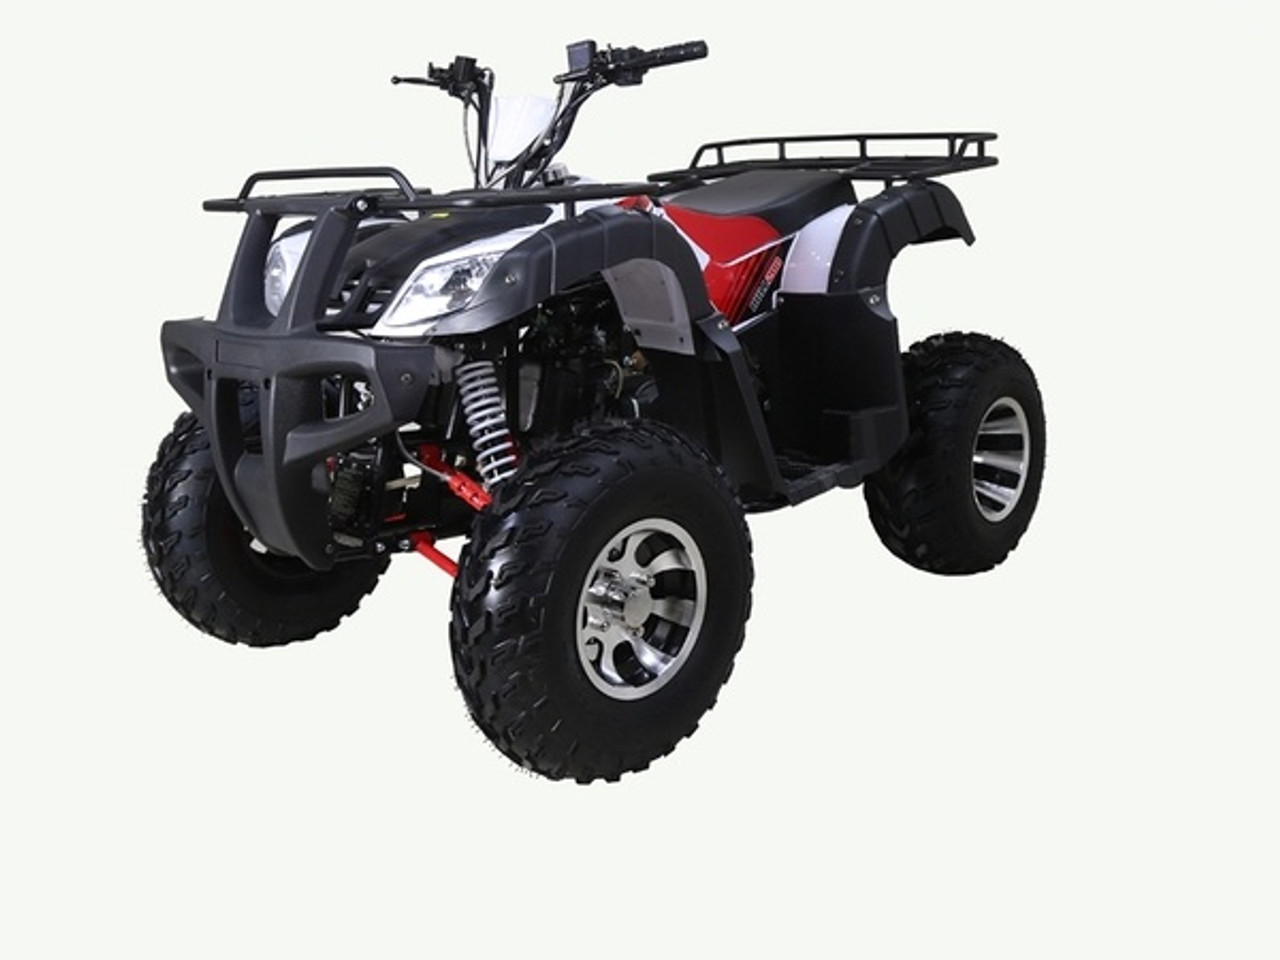 TaoTao BULL 200 169CC, Air Cooled, 4-Stroke, 1-Cylinder, Automatic - Fully Assembled and Tested - RED